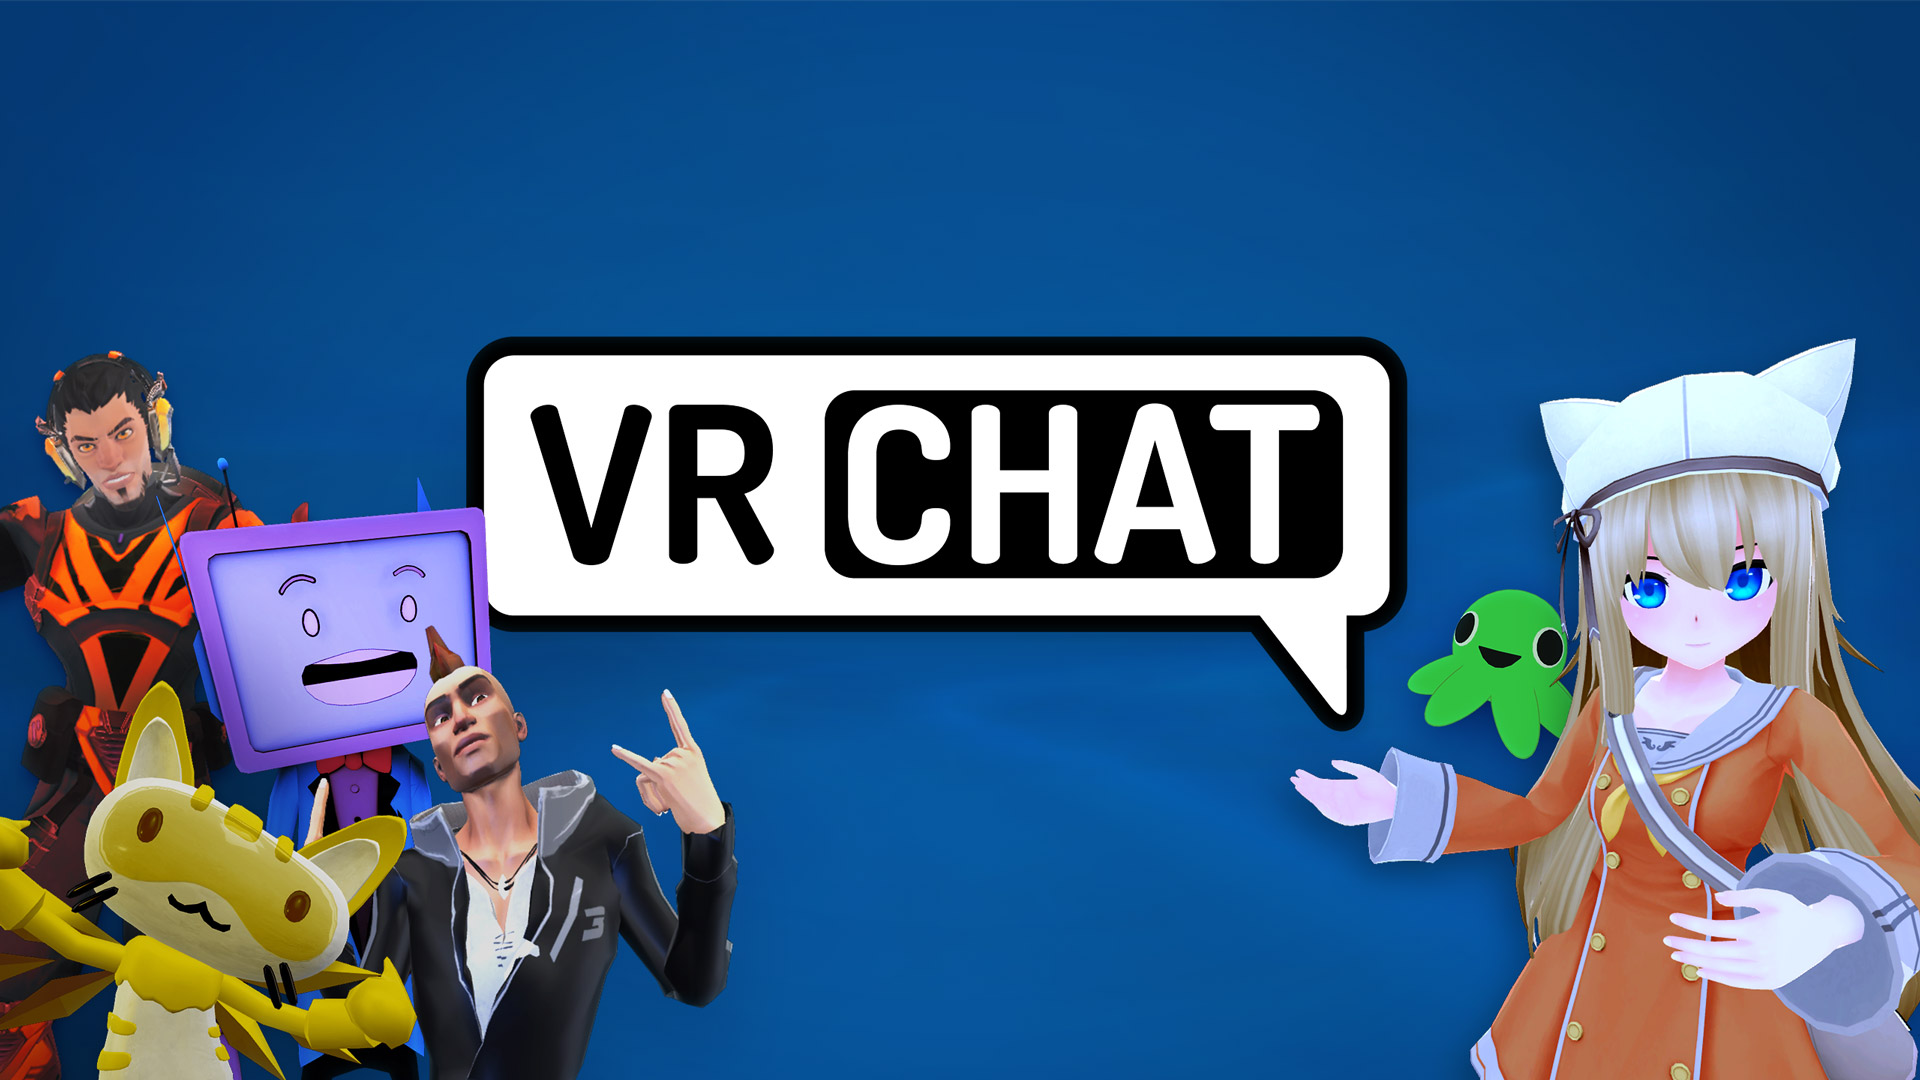 Vrchat Memes May Have Gone In 2018